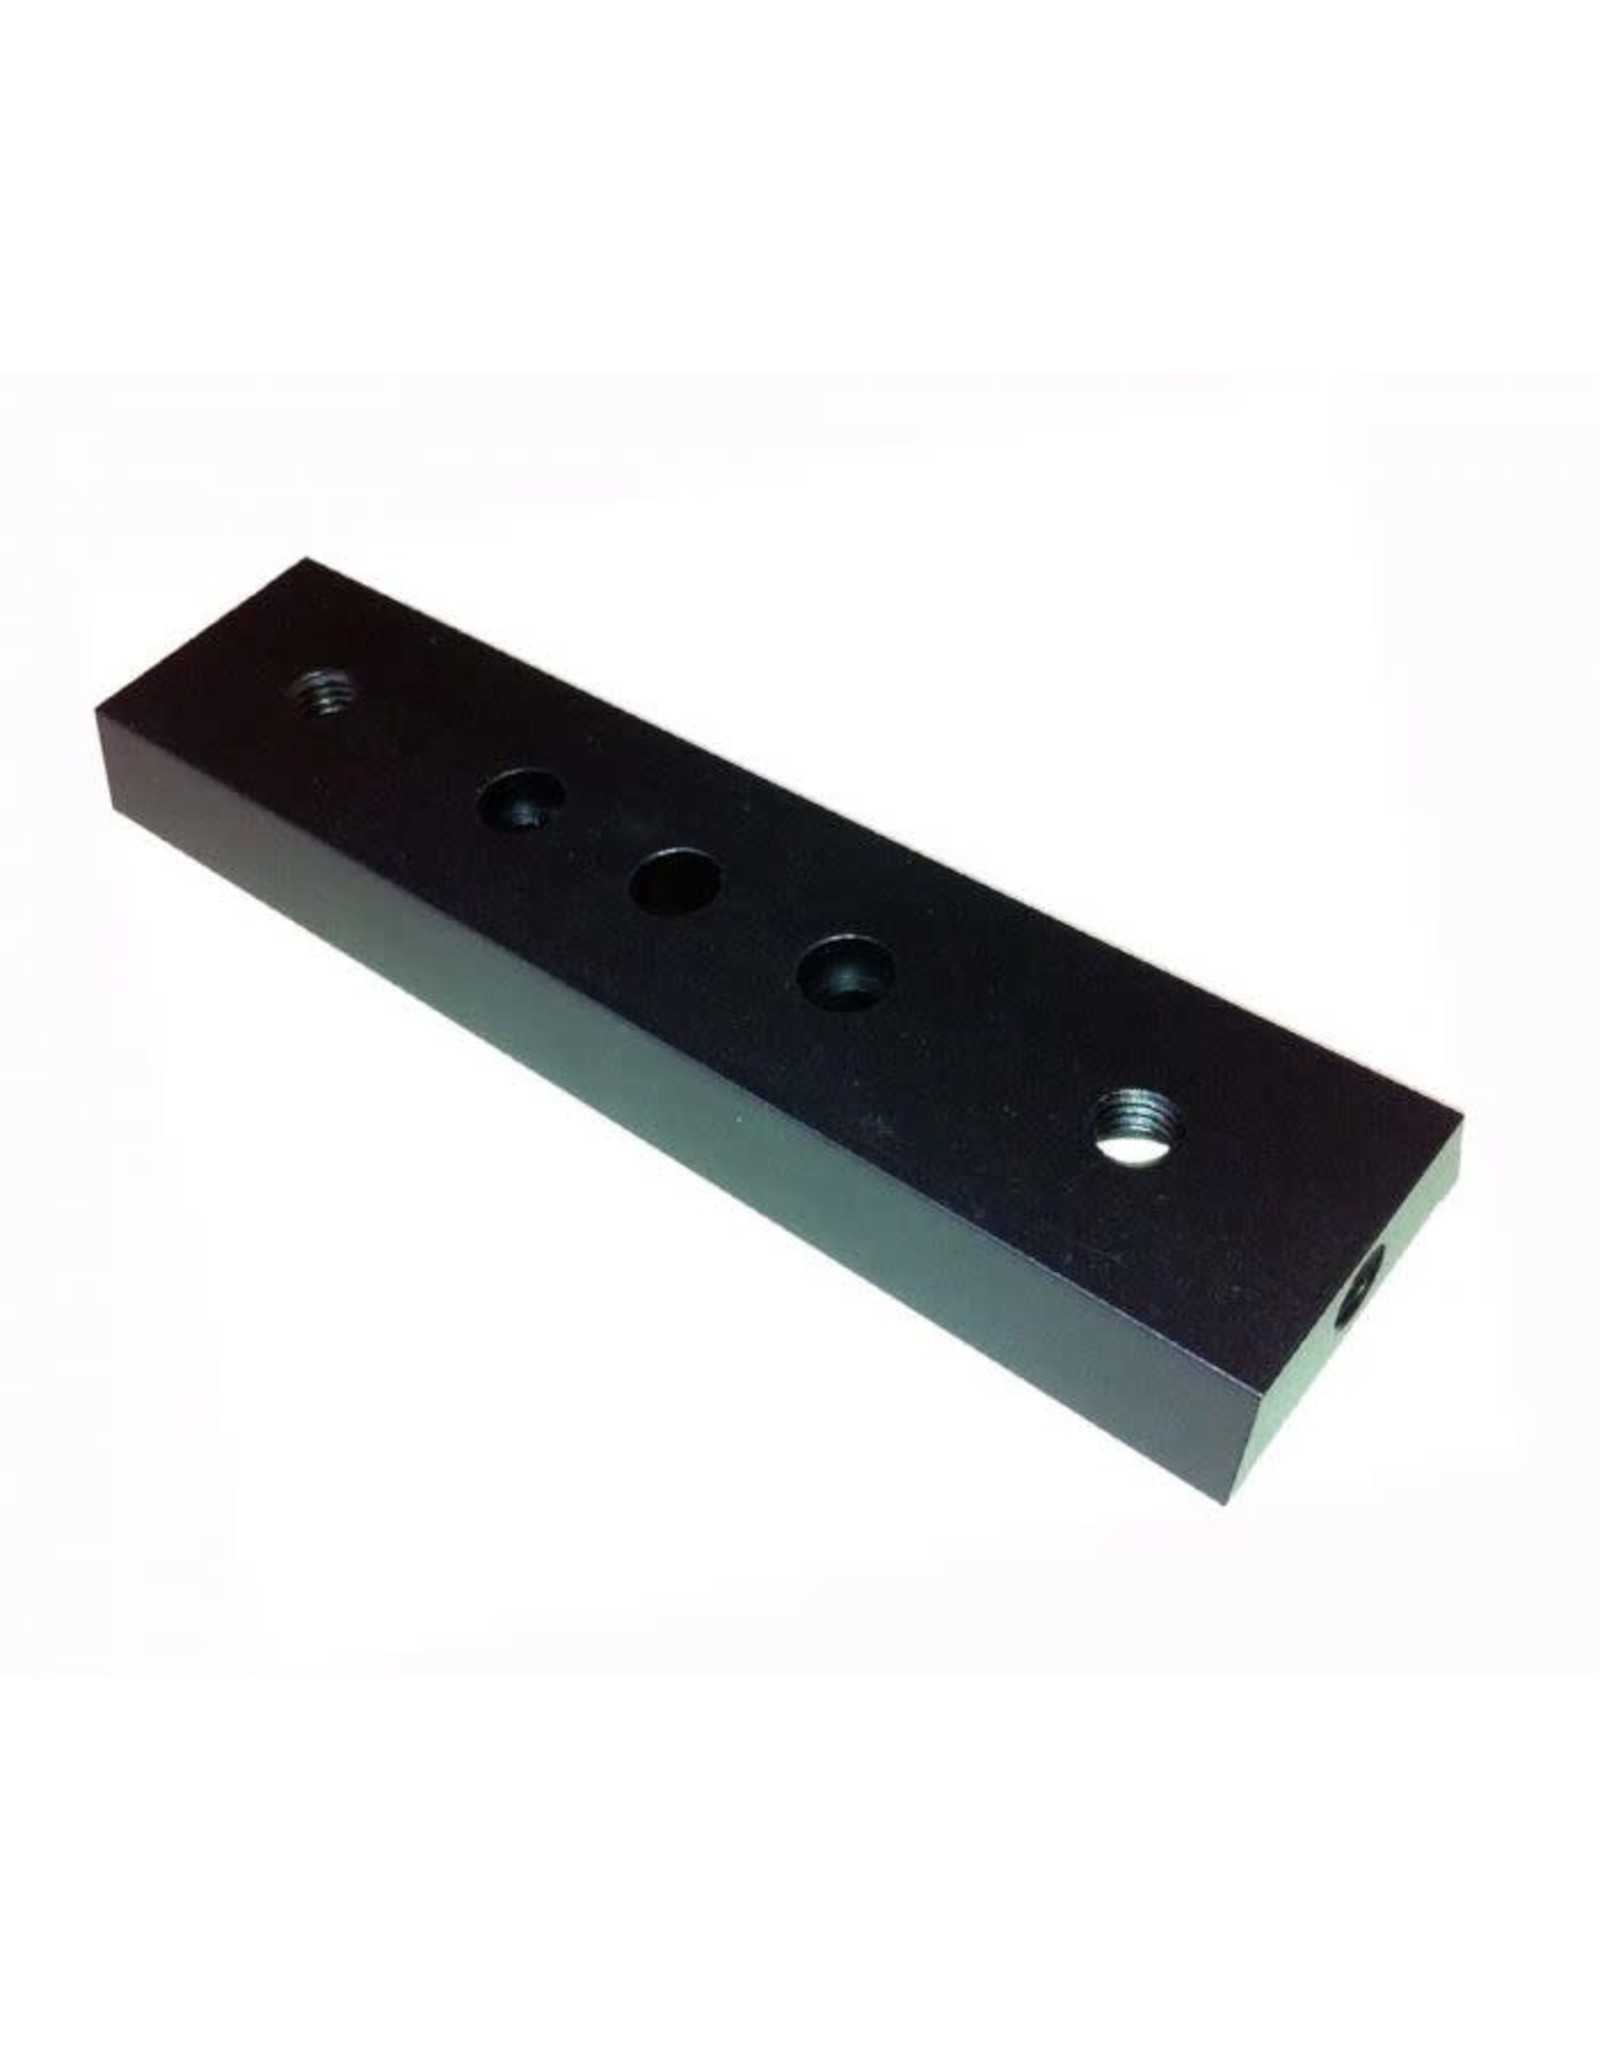 iOptron iOptron 166mm Dovetail Plate for SkyTracker Mount